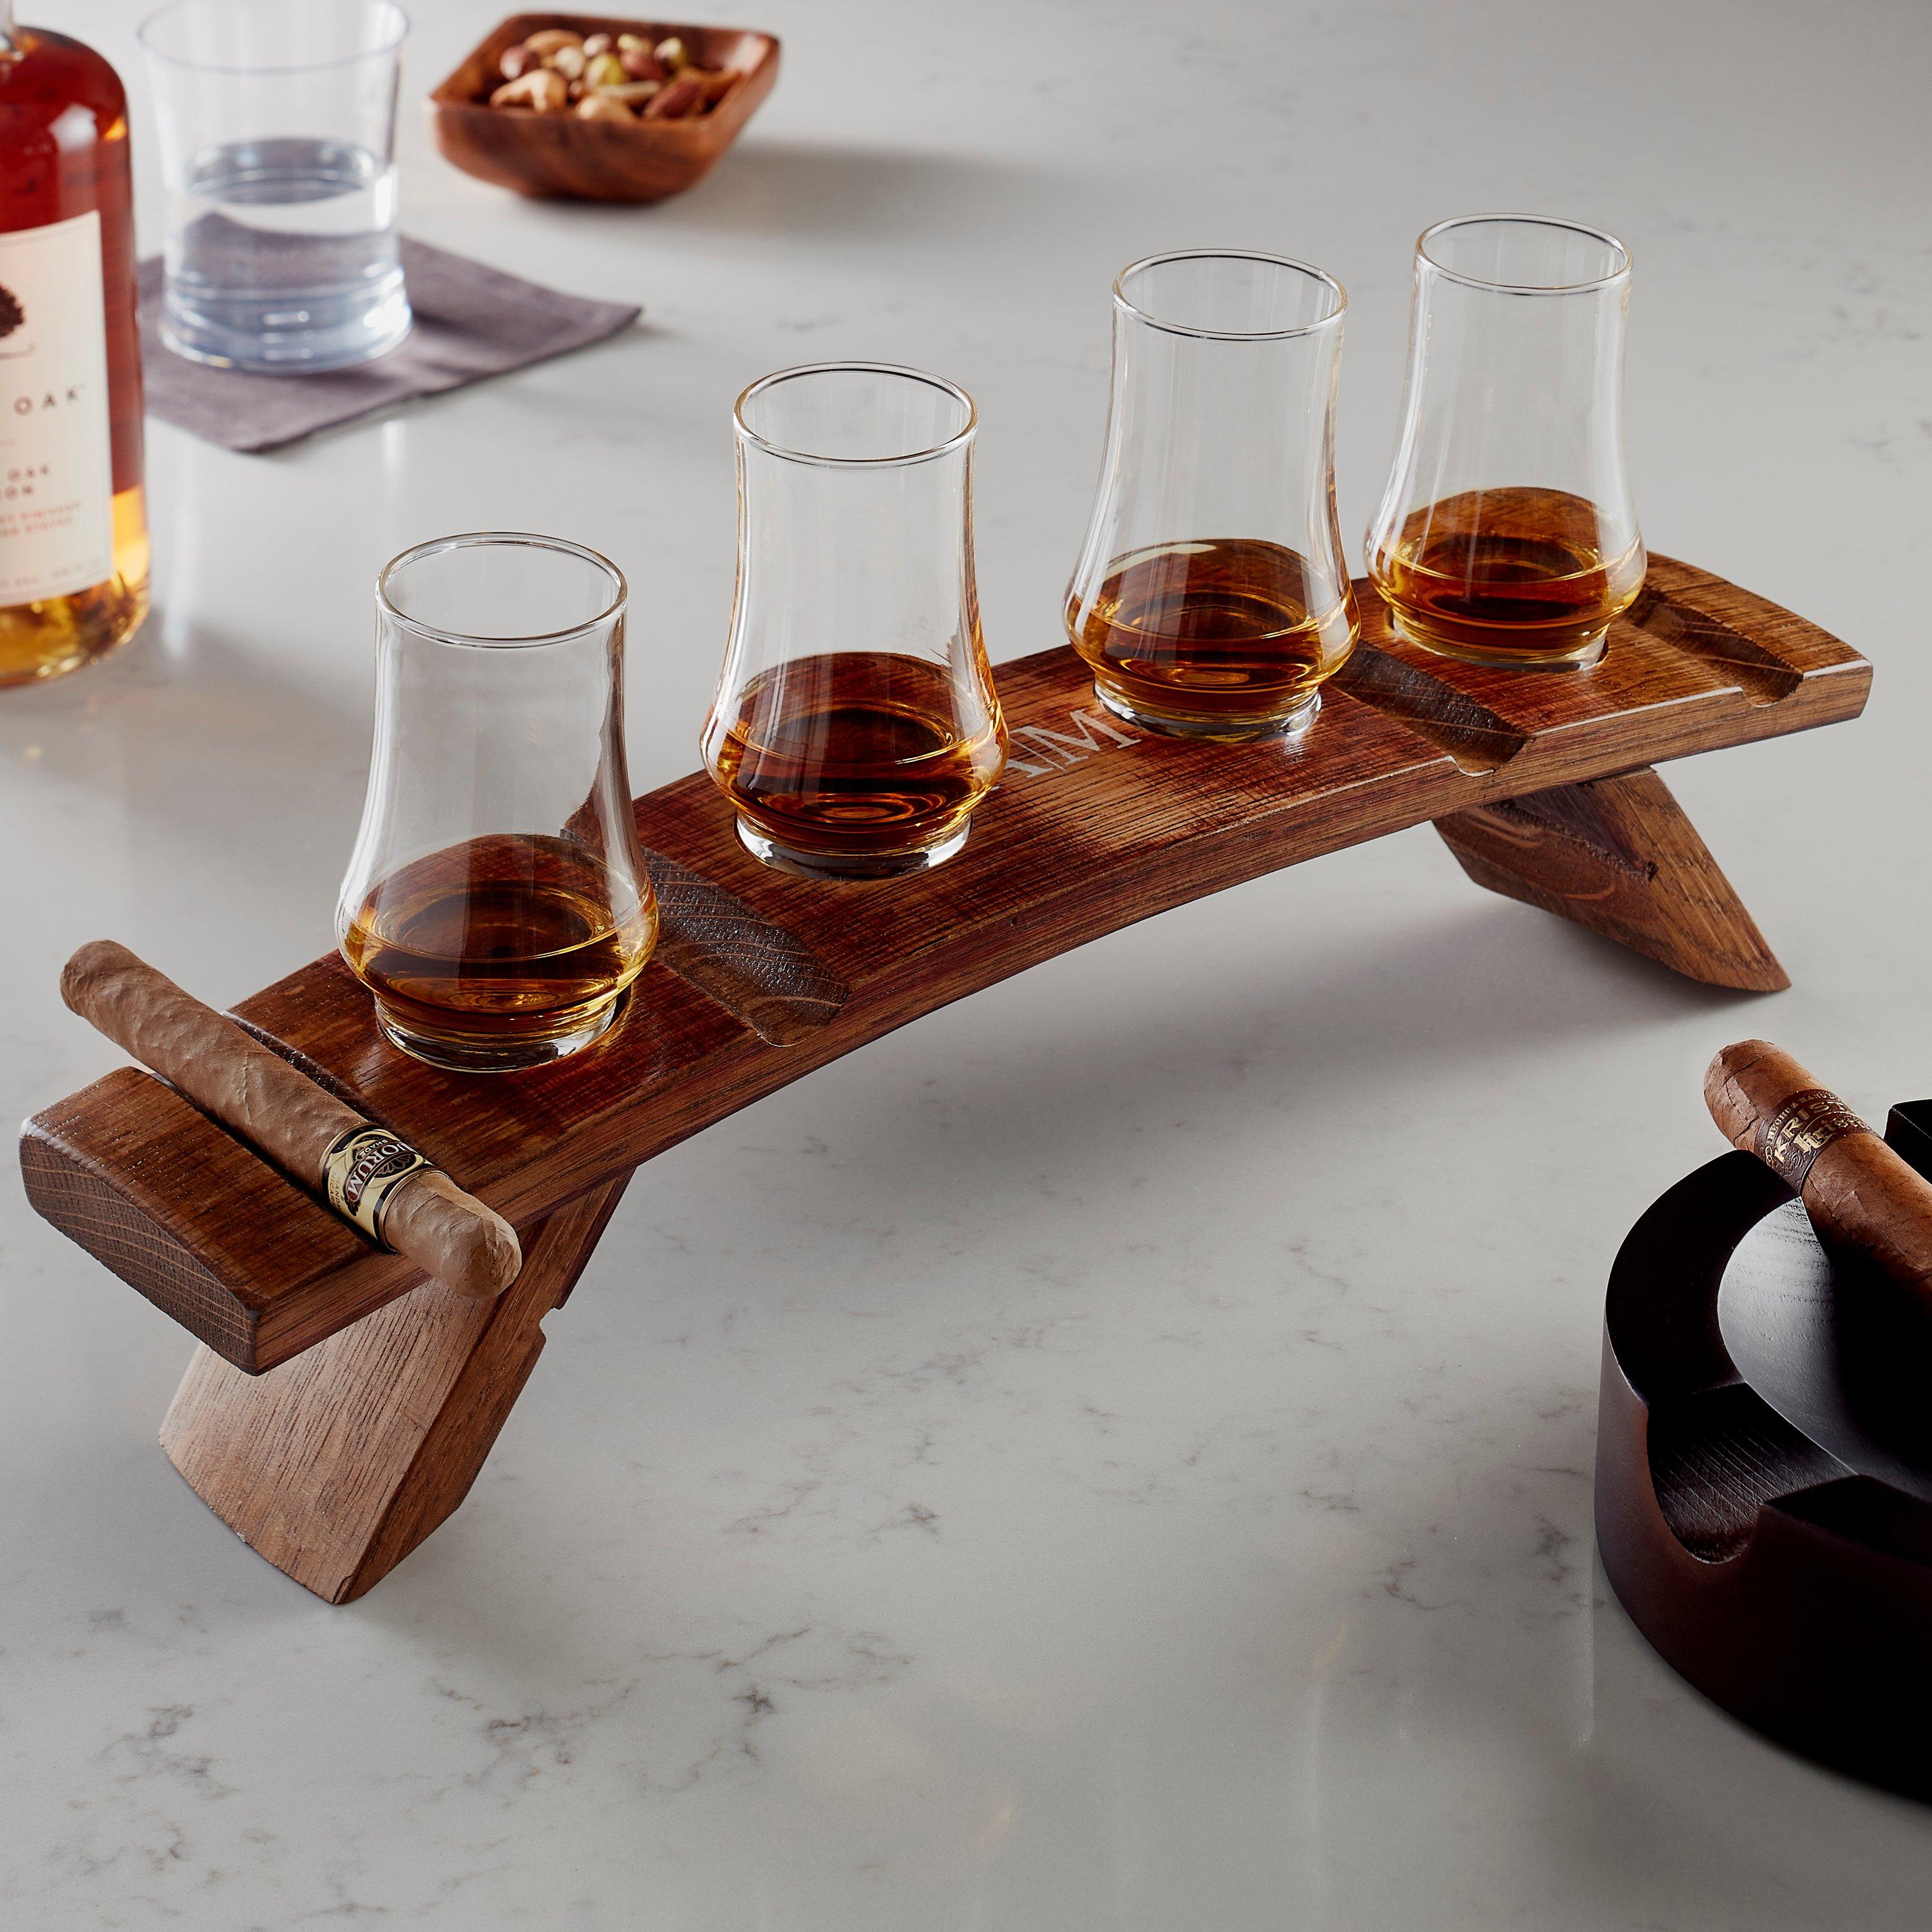 FLIGHT LOUNGE” Portable Wine/Shot glass and cigar party rack